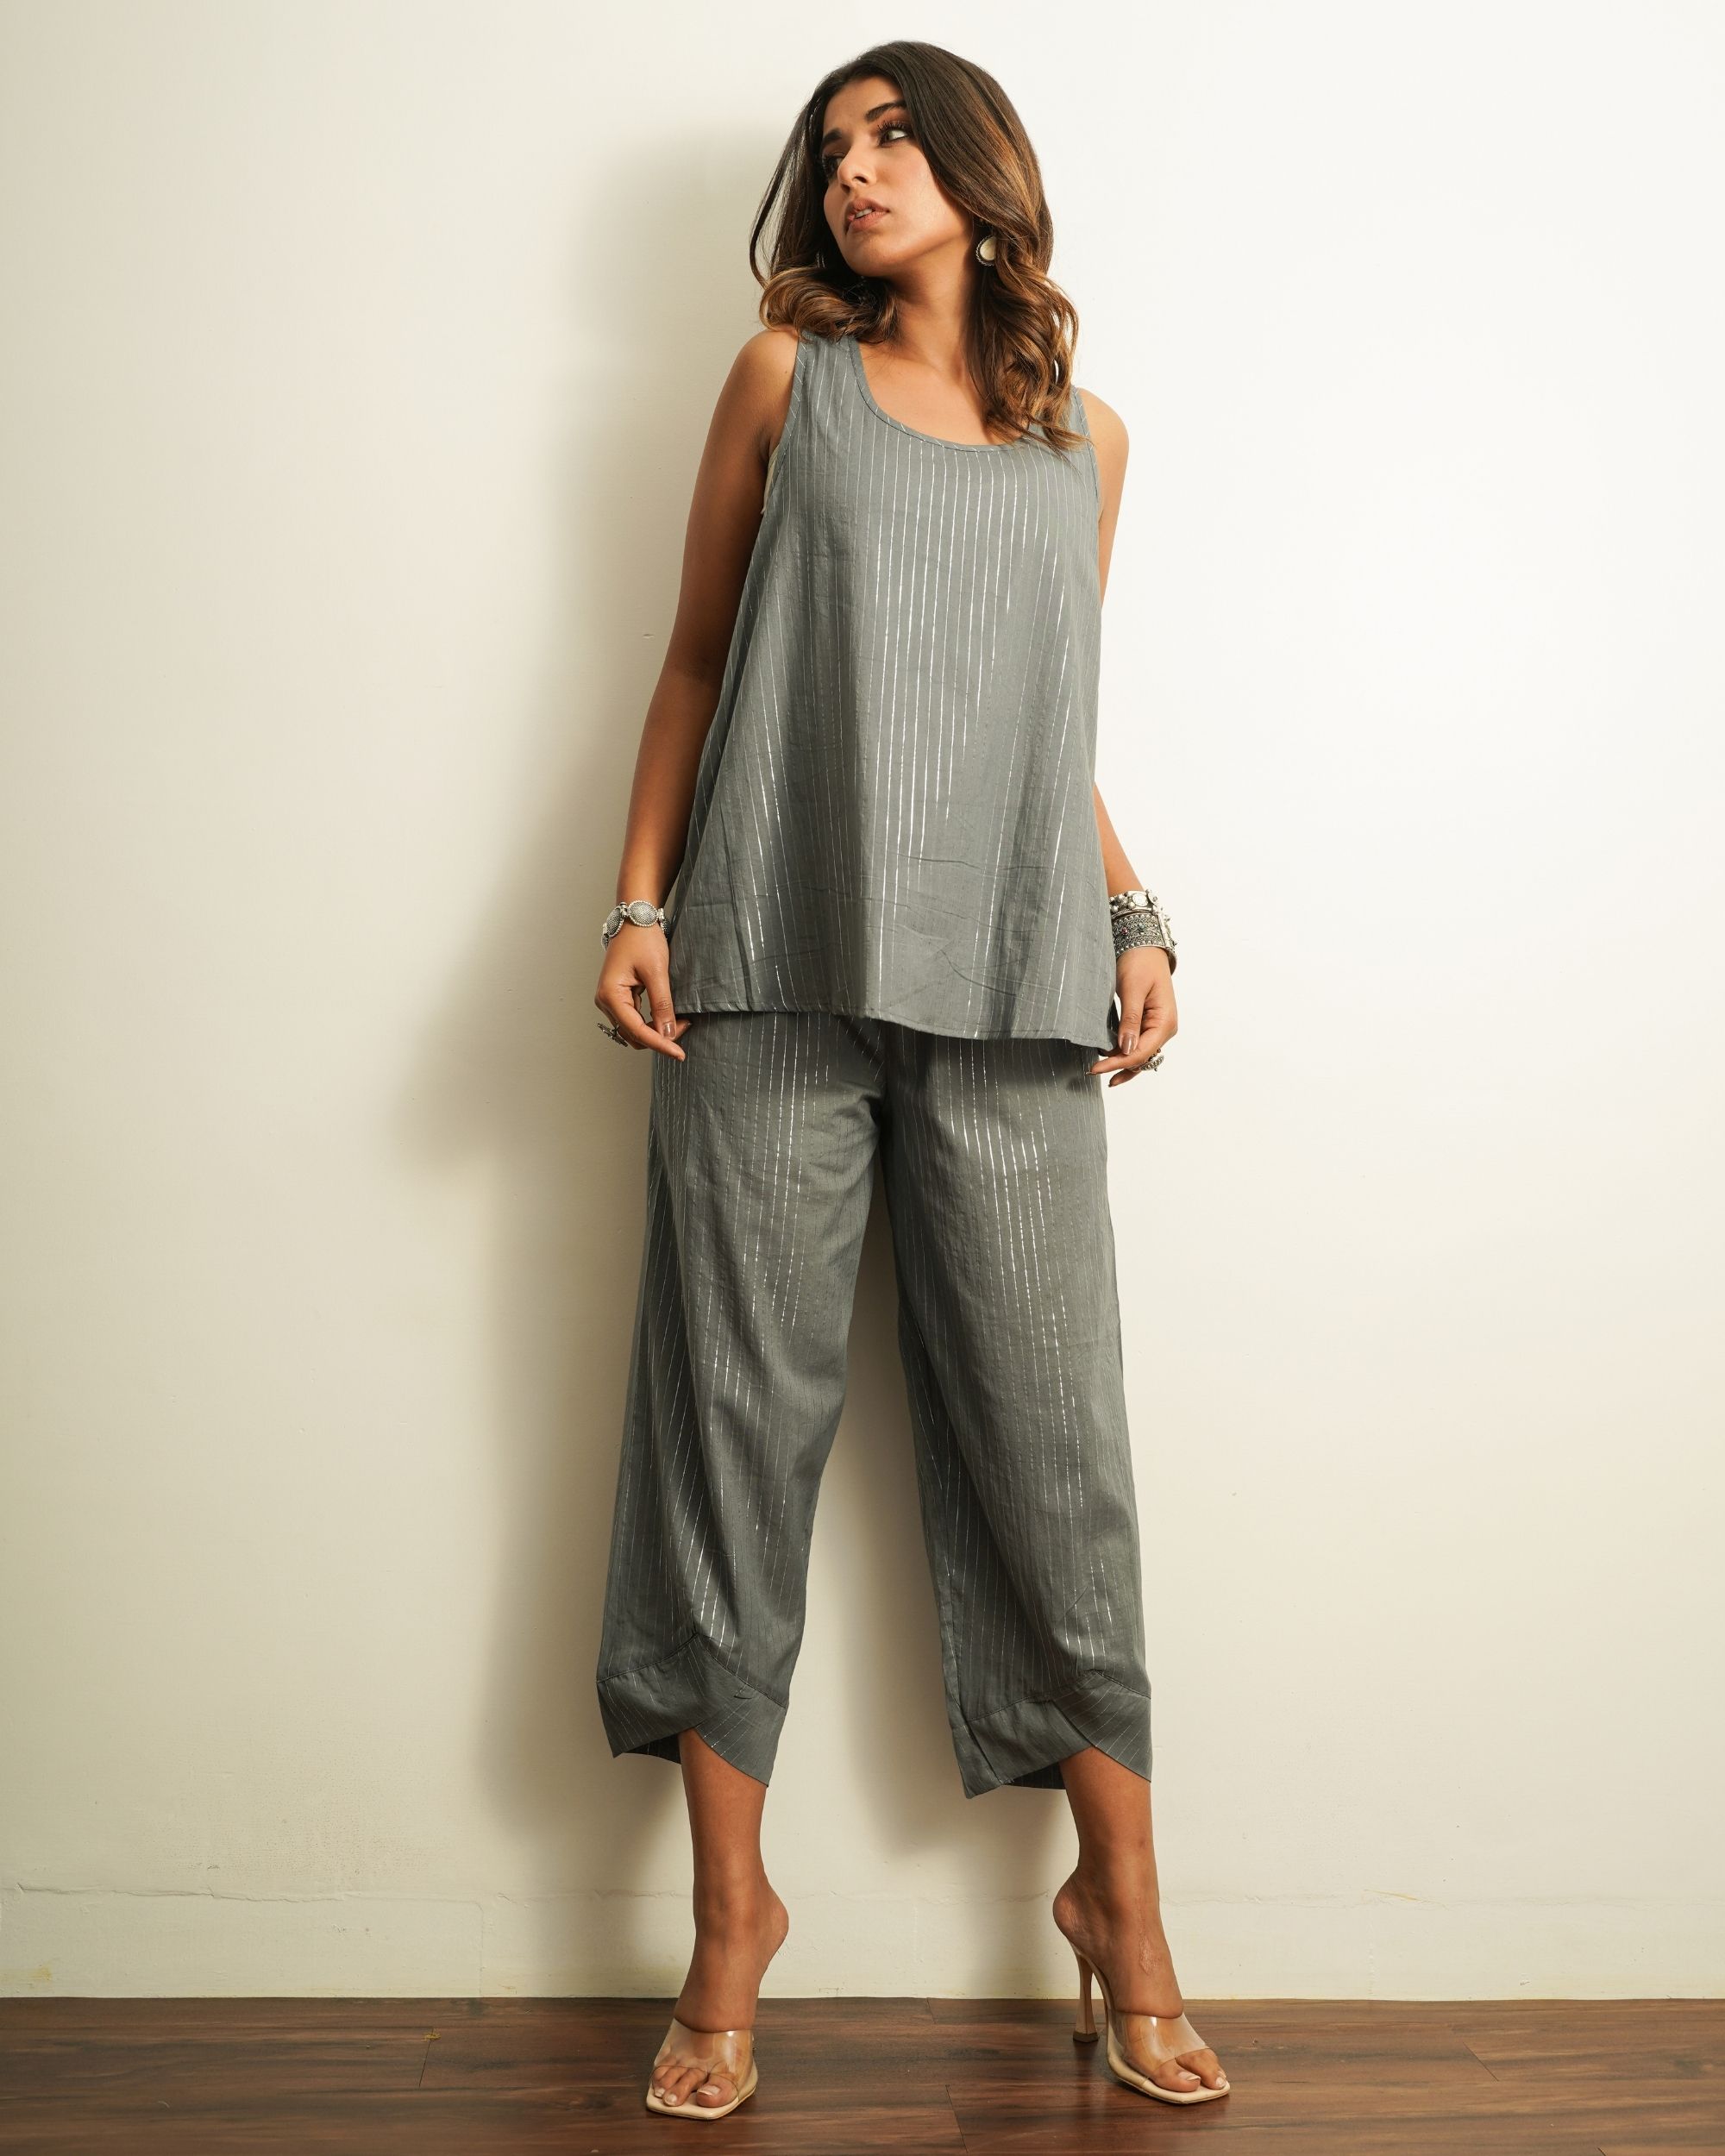 Grey strips sleeveless top with pant - set of two